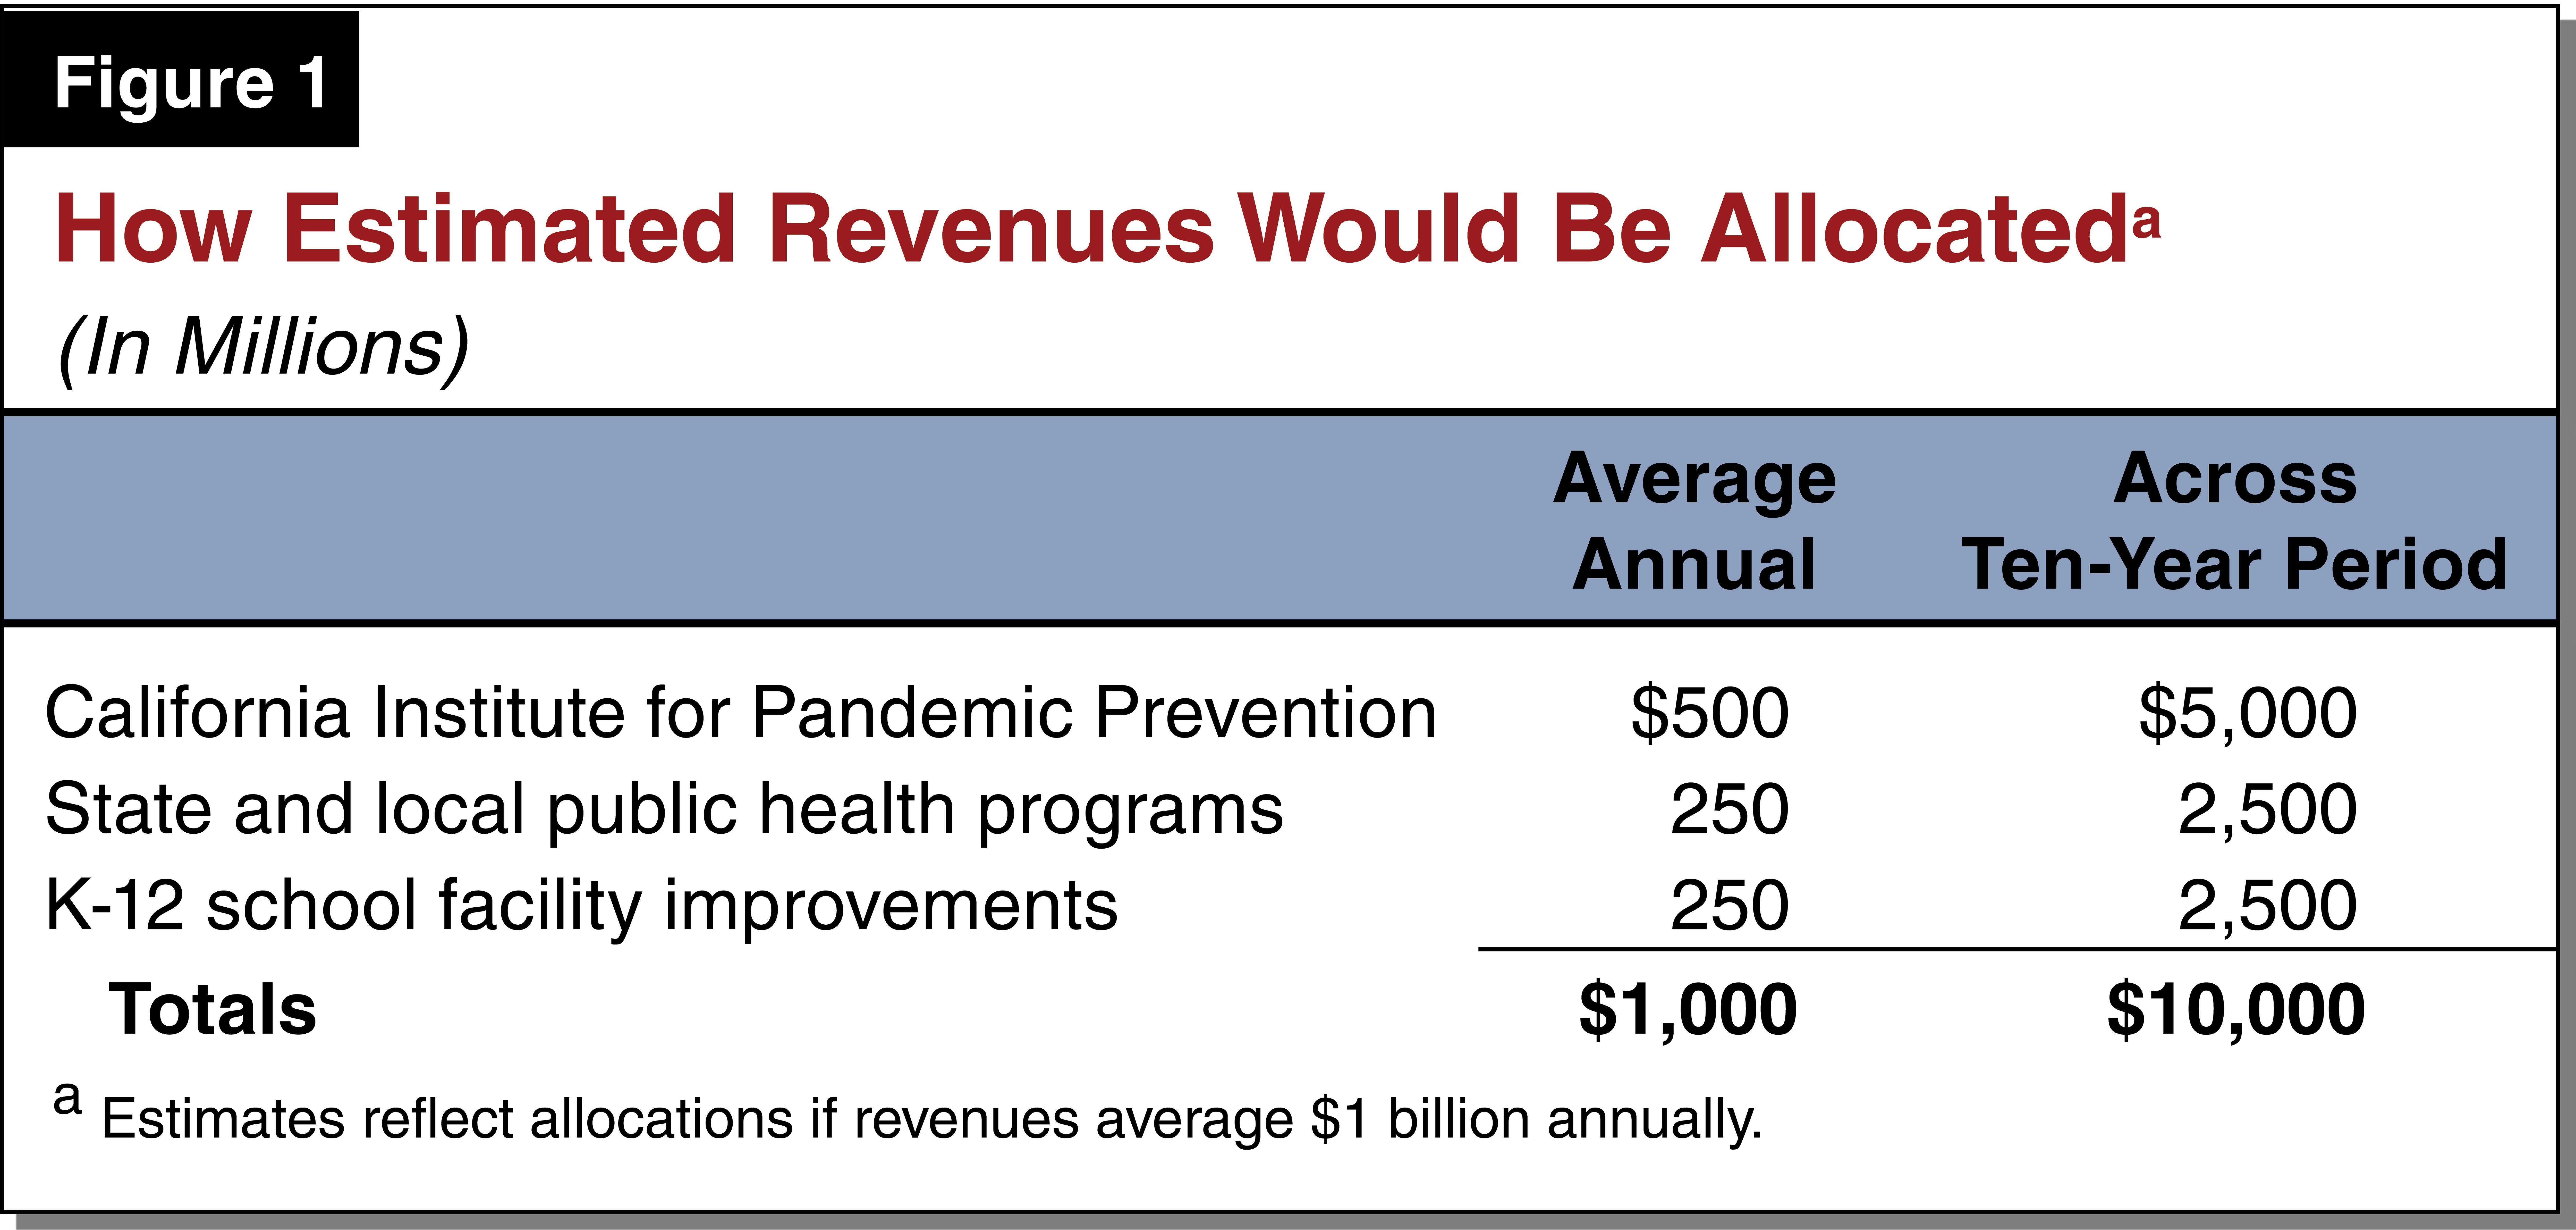 How Estimated Revenues Would Be Allocated